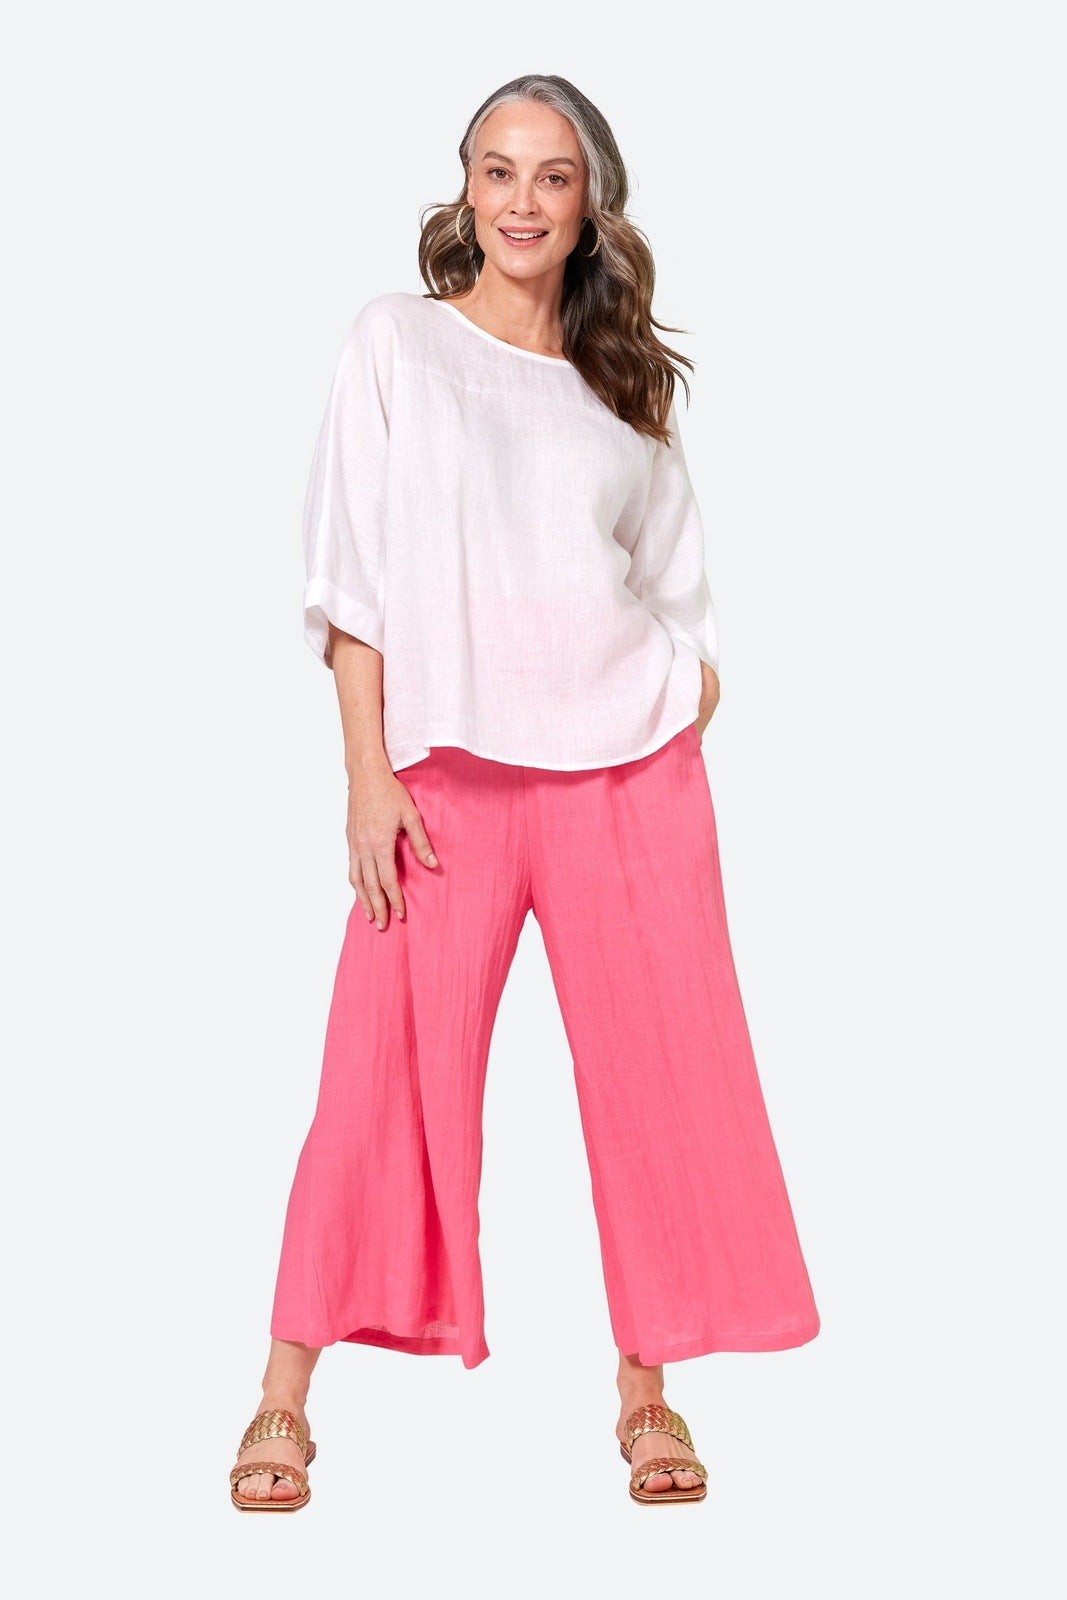 Eb & Ive Studio Relaxed Top Salt OS